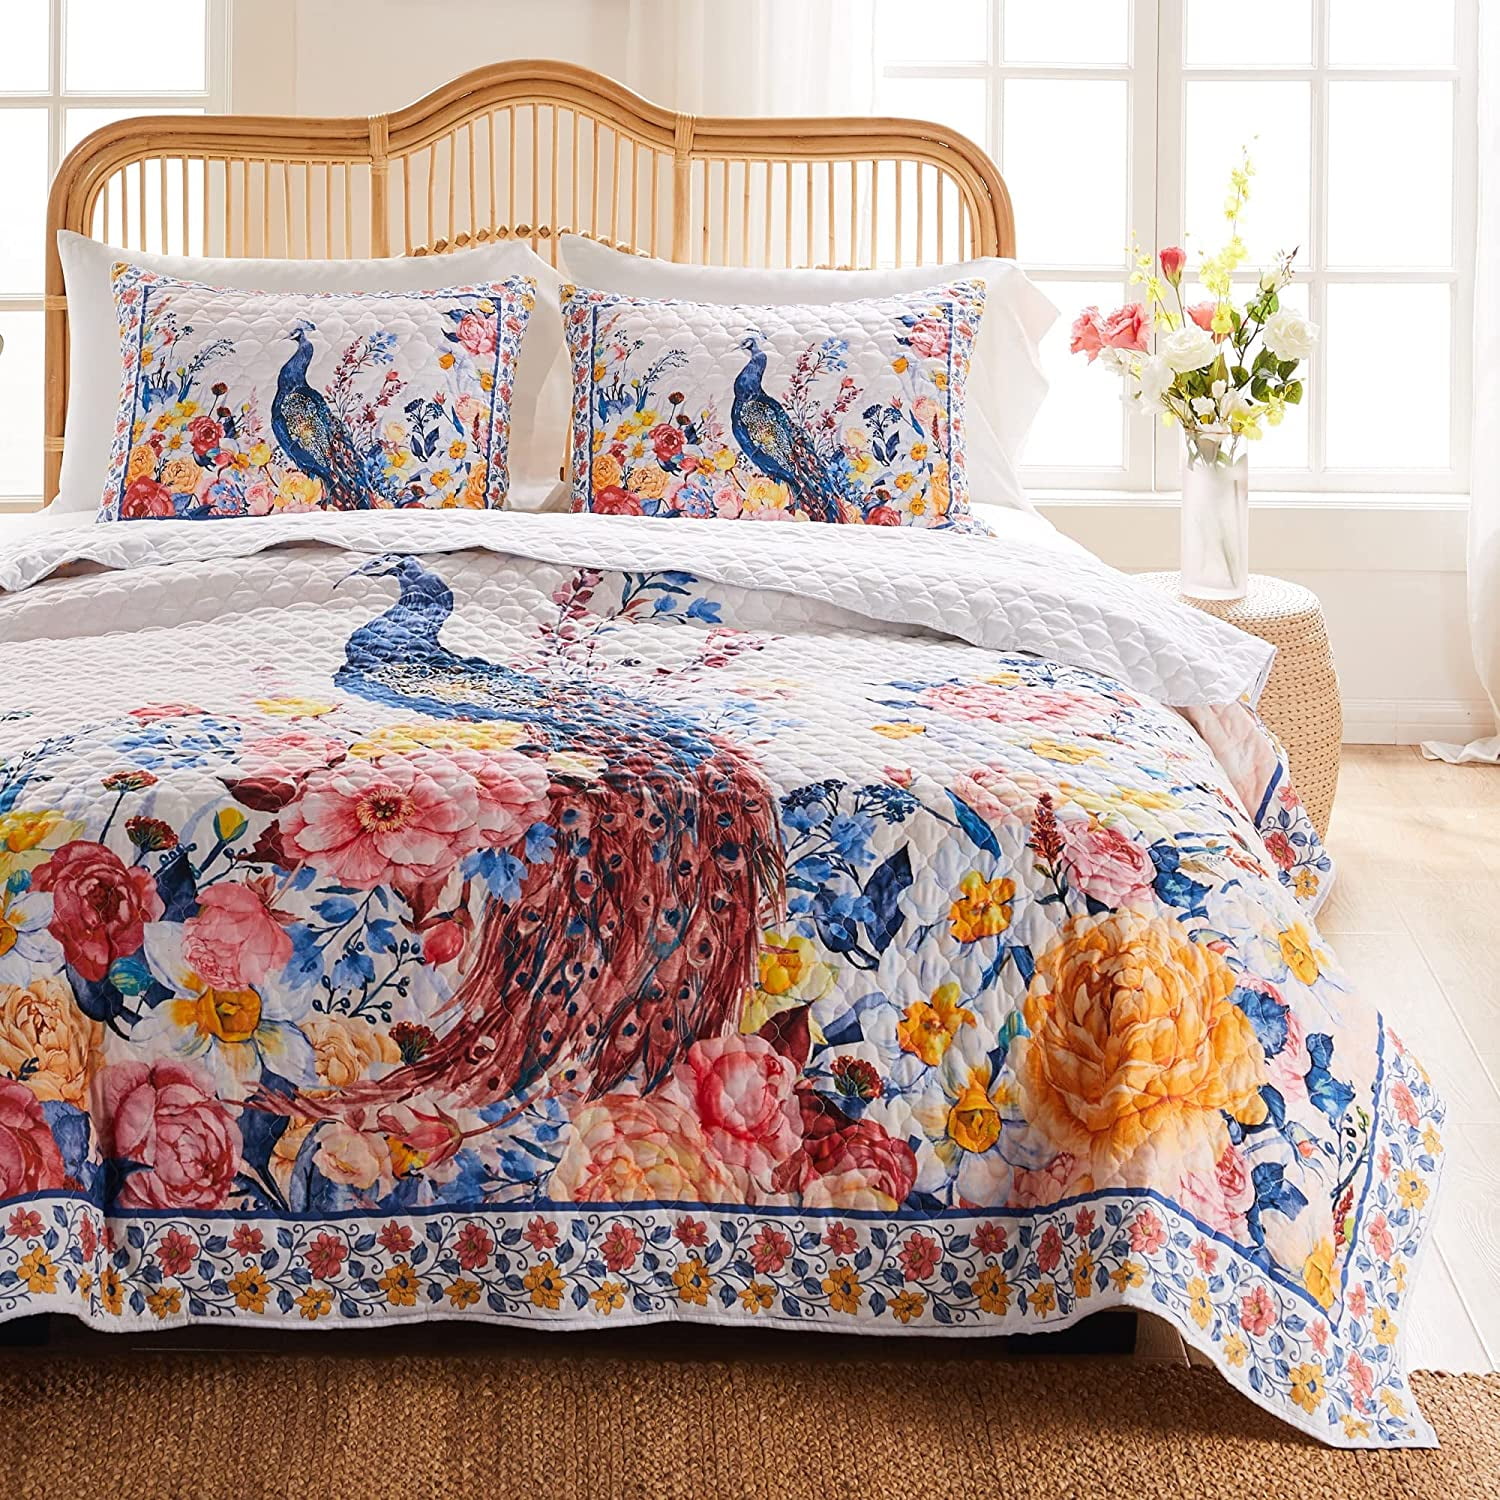 Details about   BEAUTIFUL CHIC COTTAGE PINK ROSE RED PURPLE GREEN BLUE SHABBY FLORAL QUILT SET 